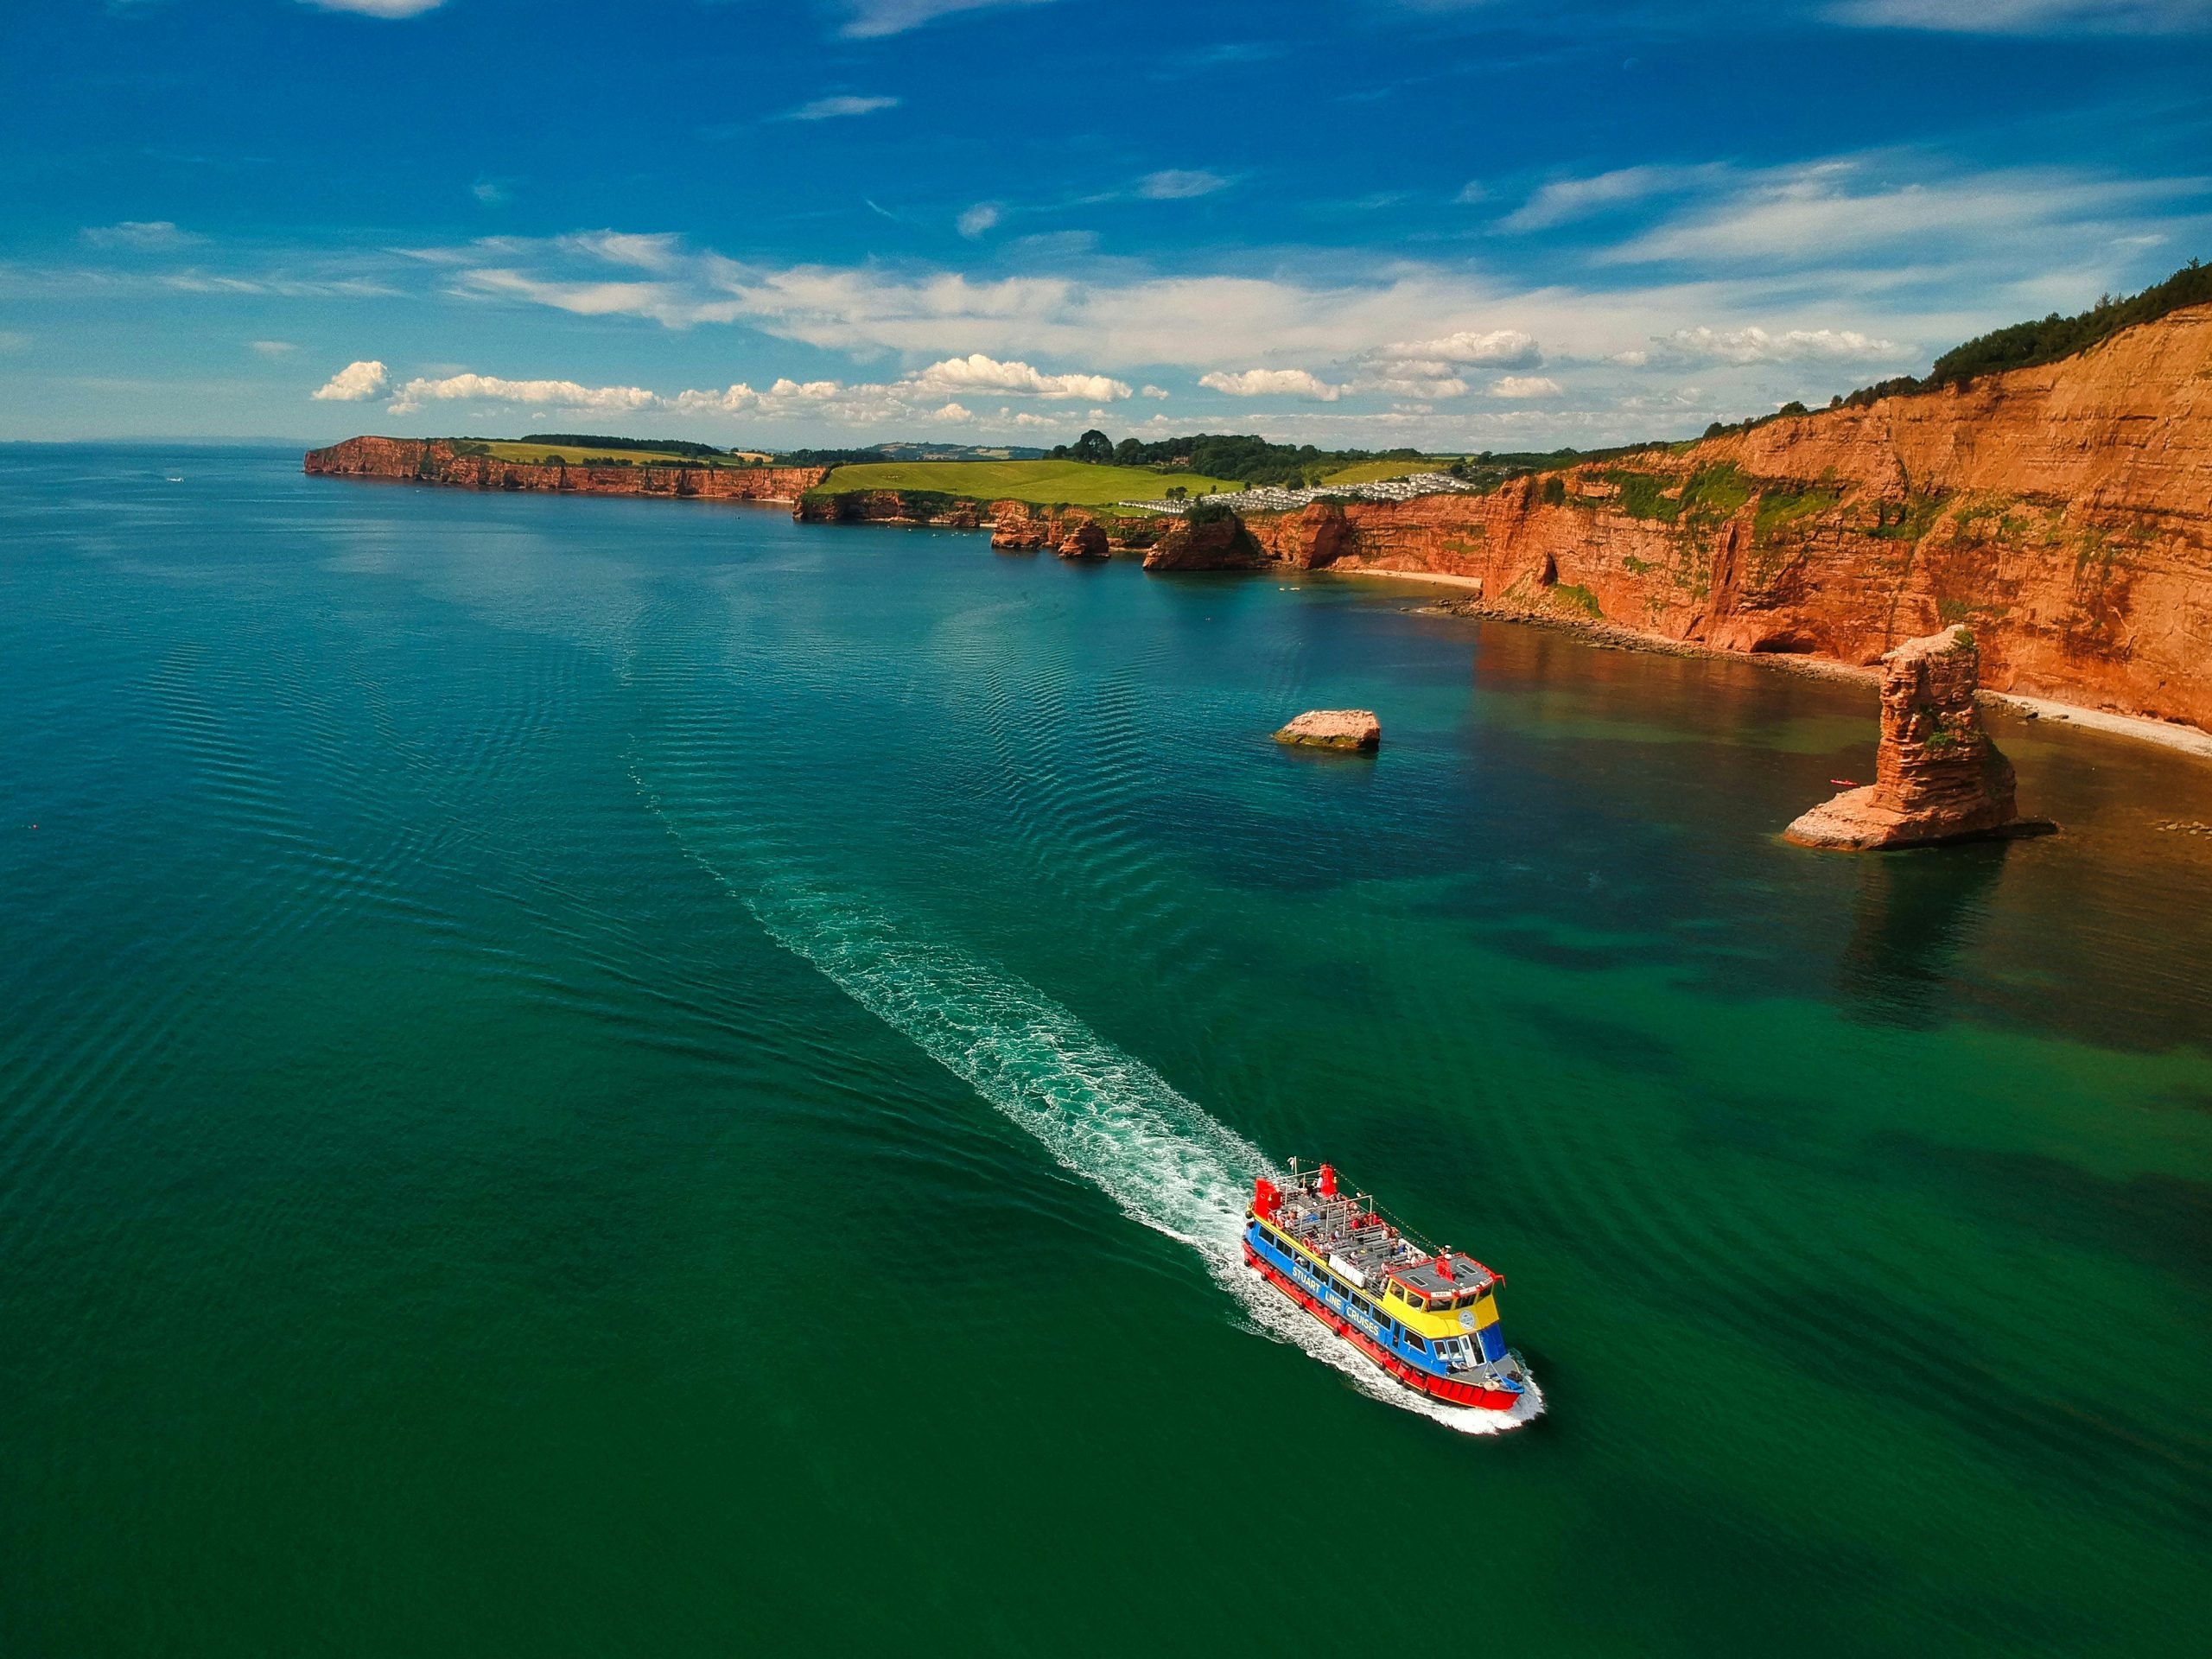 Cruisin' On A Sunny Afternoon - A sightseeing cruiser traces through clear Summer shallows off the Jurassic Coast, Devon, UK High Peak, Otterton, Sidmouth, UK